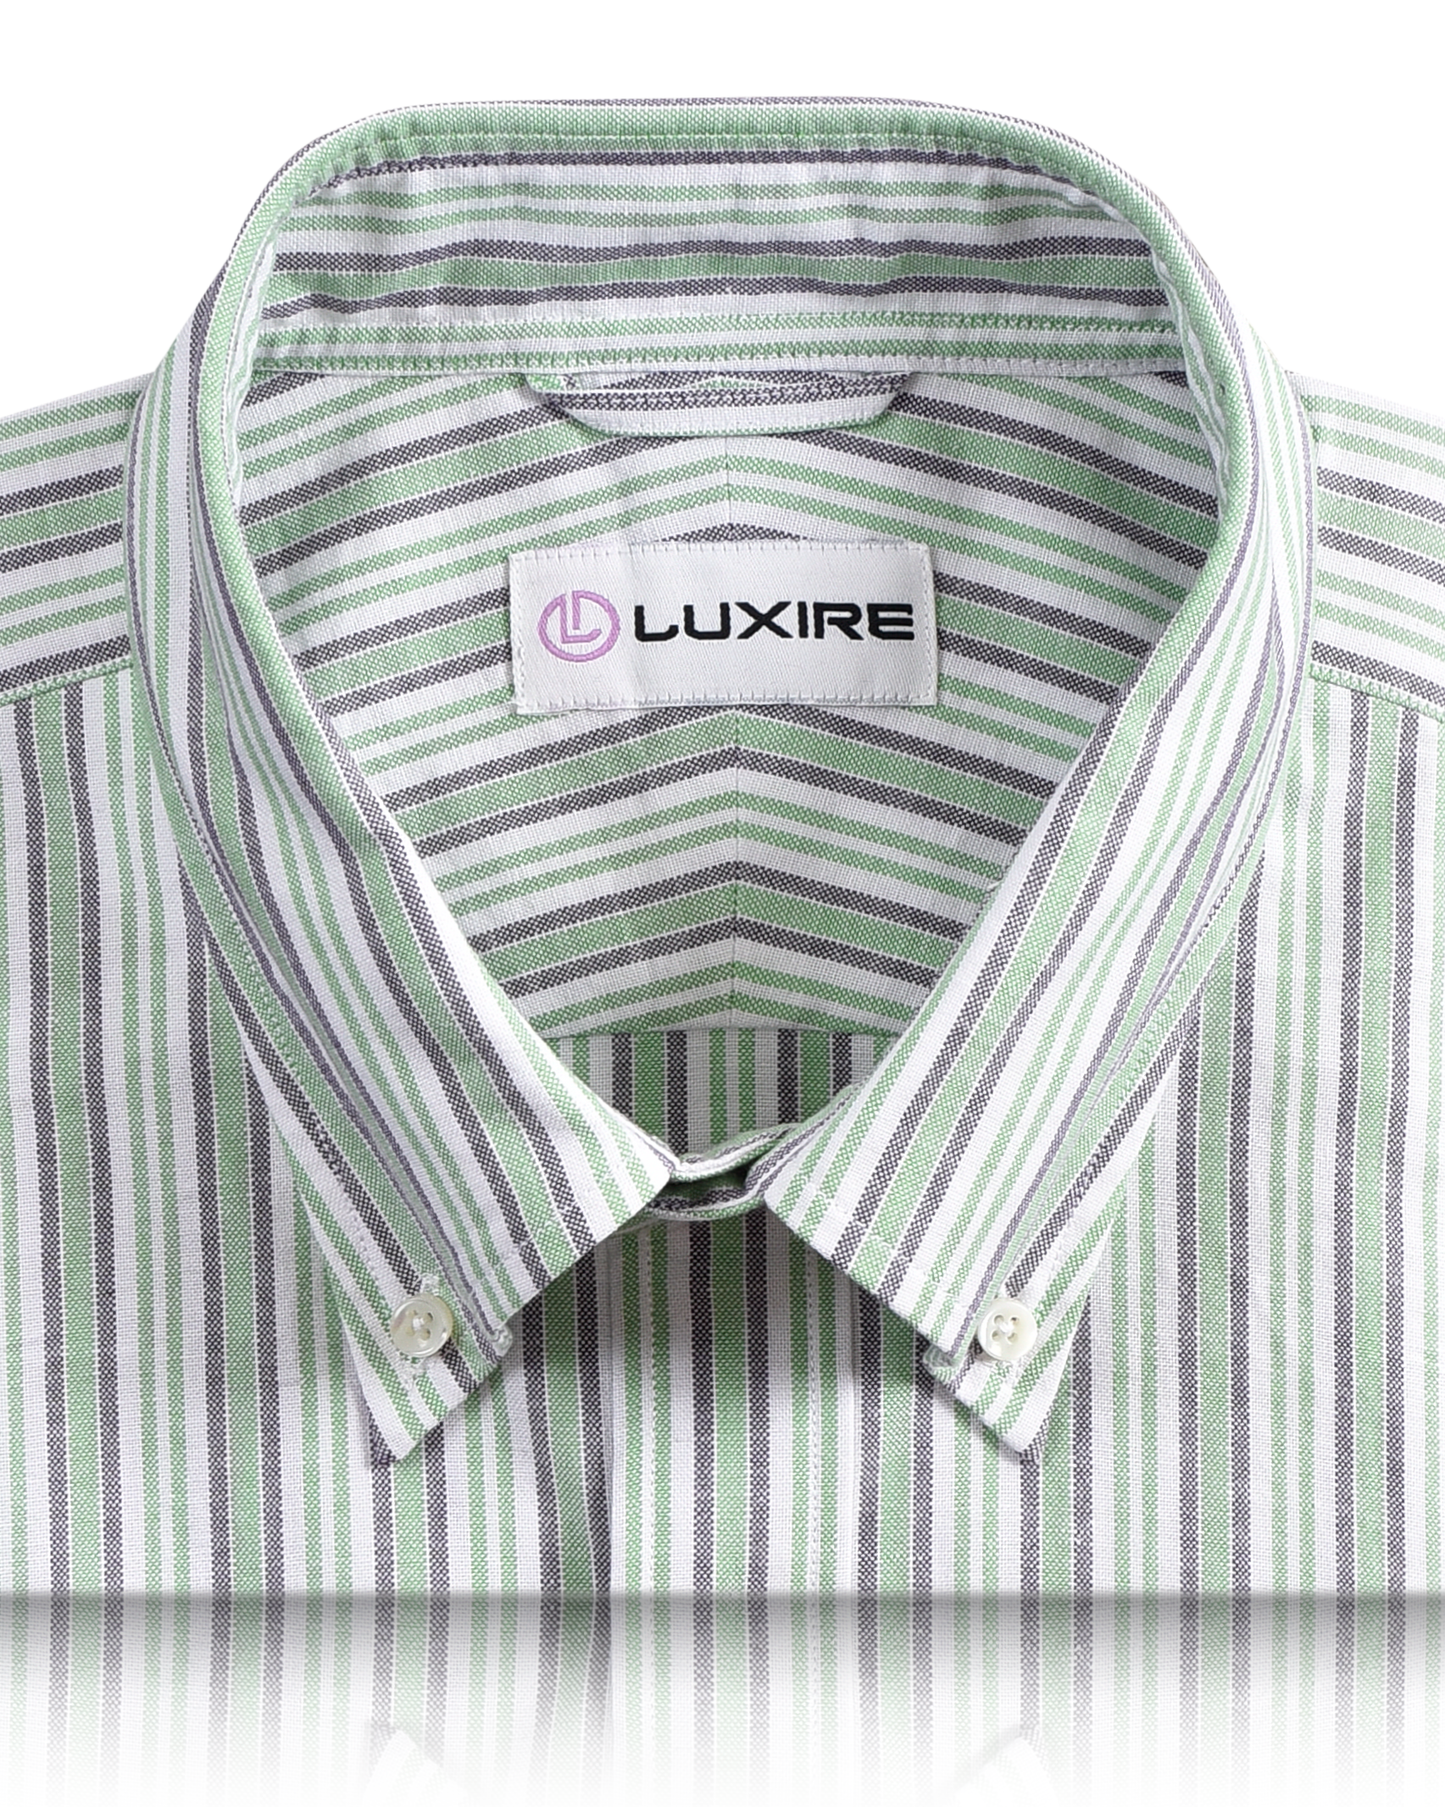 Collar of the custom oxford shirt for men by Luxire in shades of green